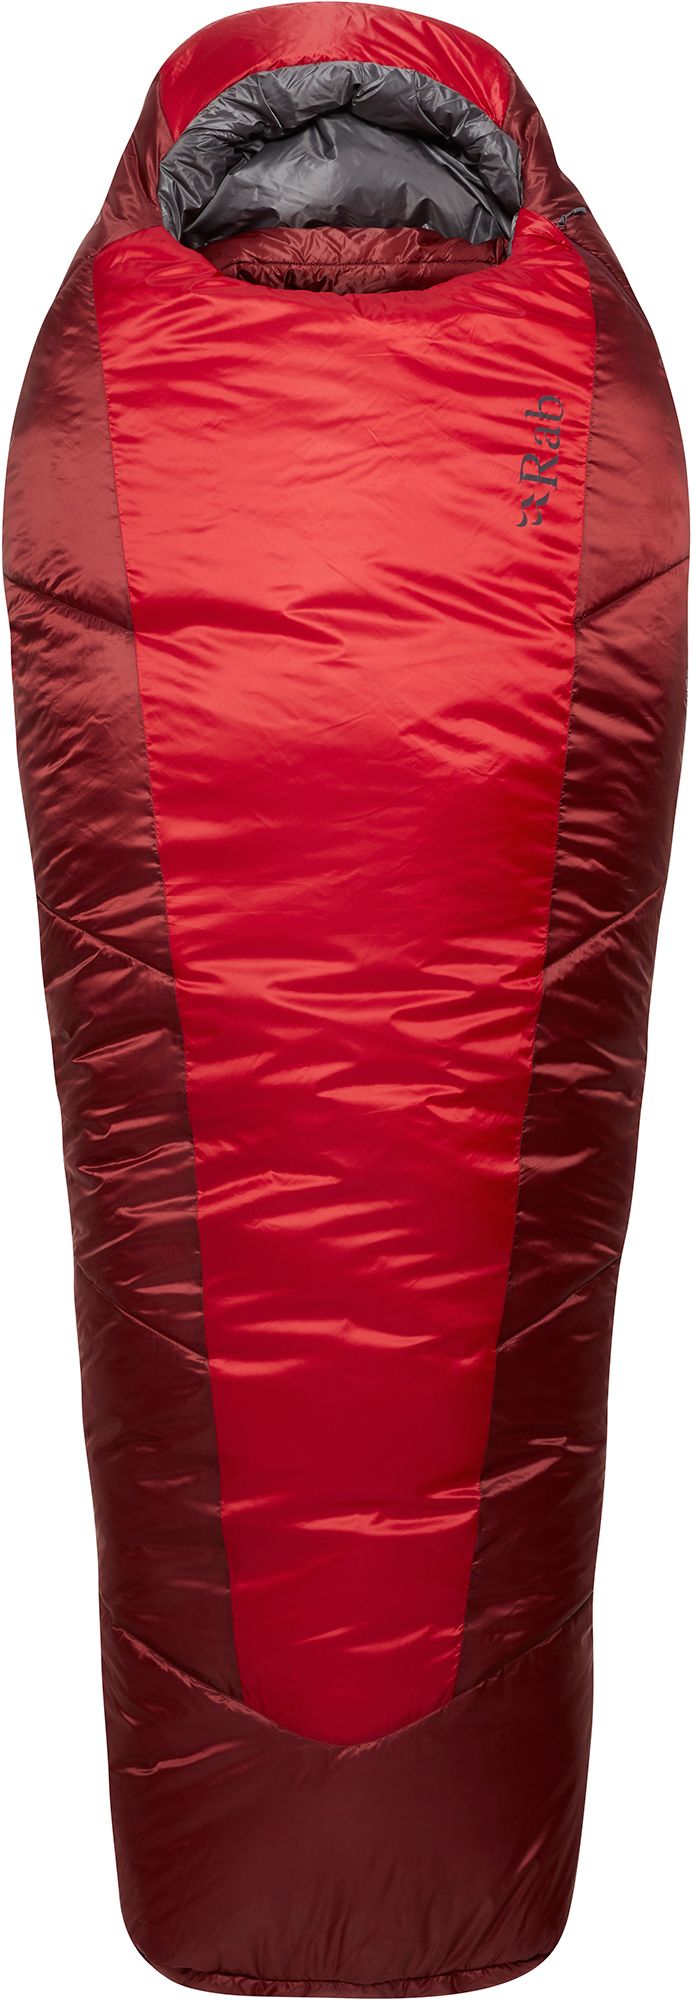 Photos - Suitcase / Backpack Cover Rab Women's Solar Eco 3 Sleeping Bag 20, Left Hand, Regular, Ascent Red | 